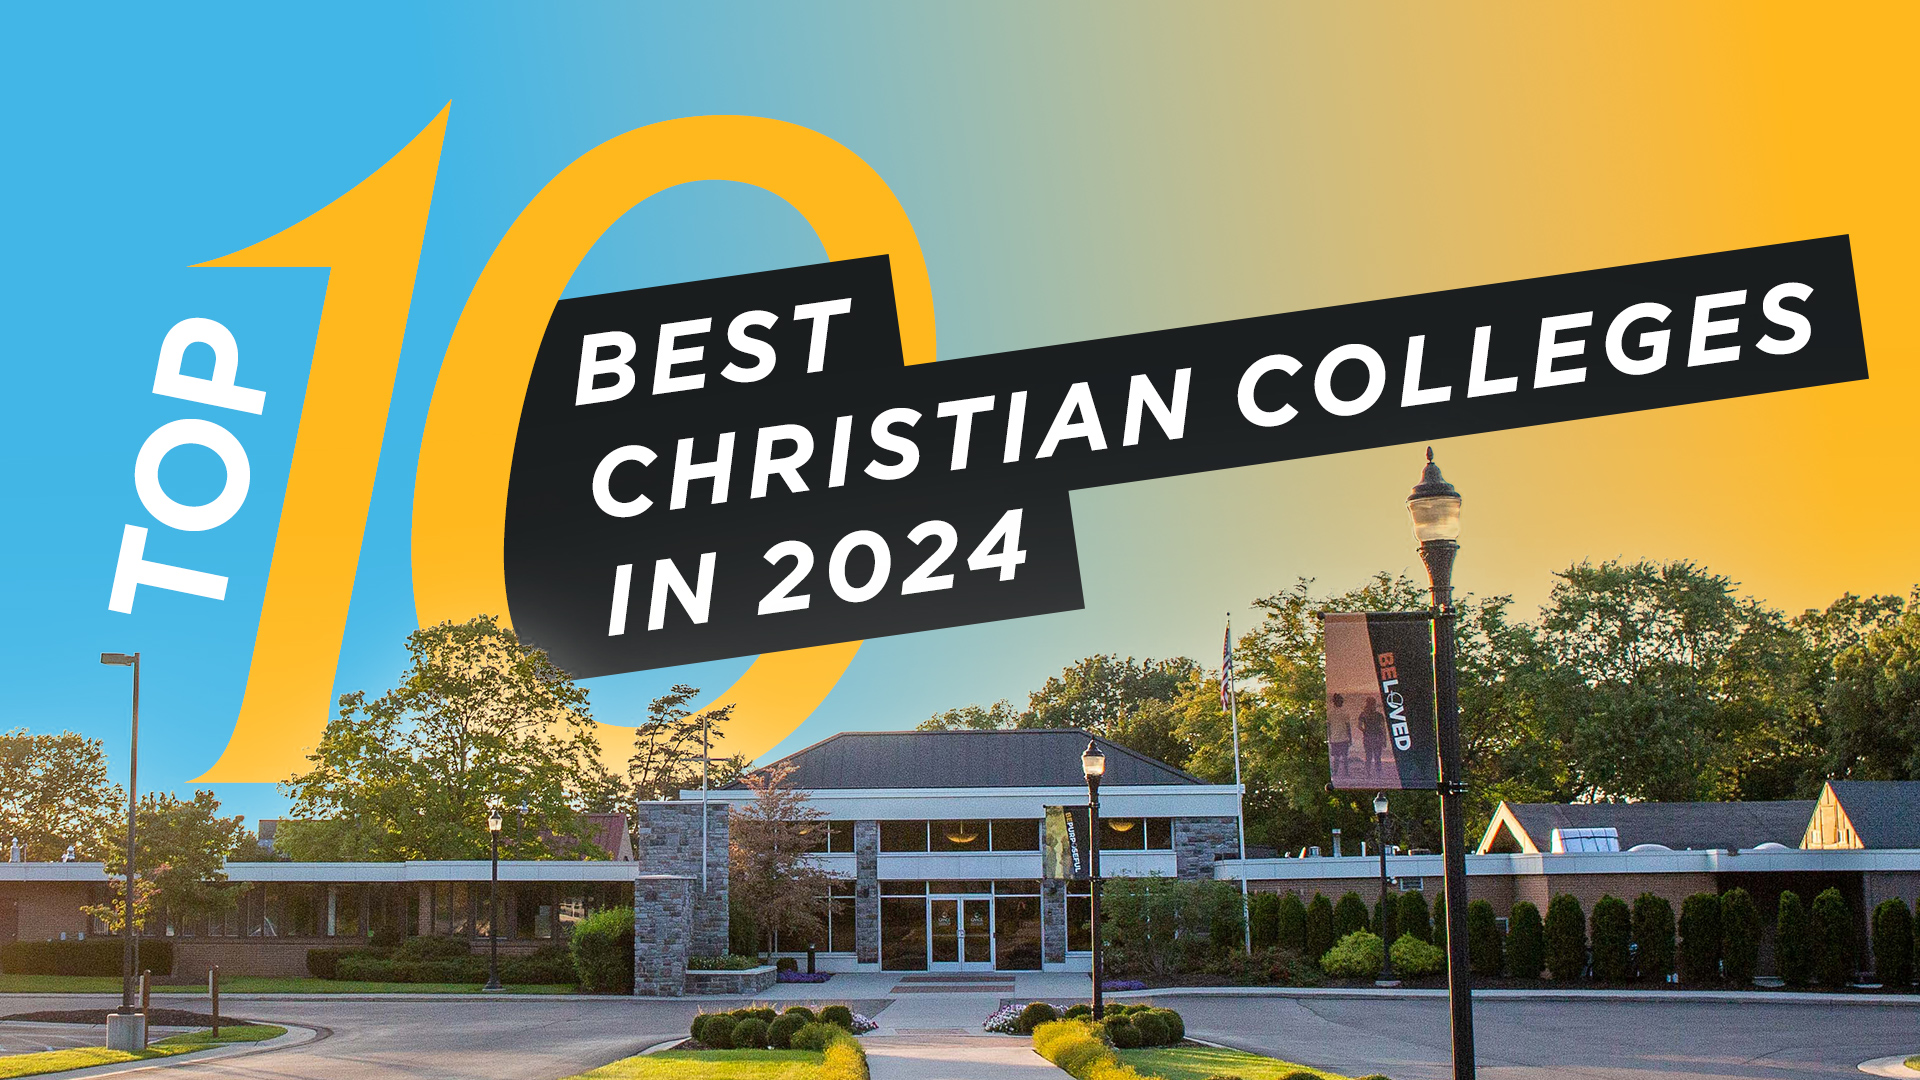 Top 10 Best Christian Colleges in 2024